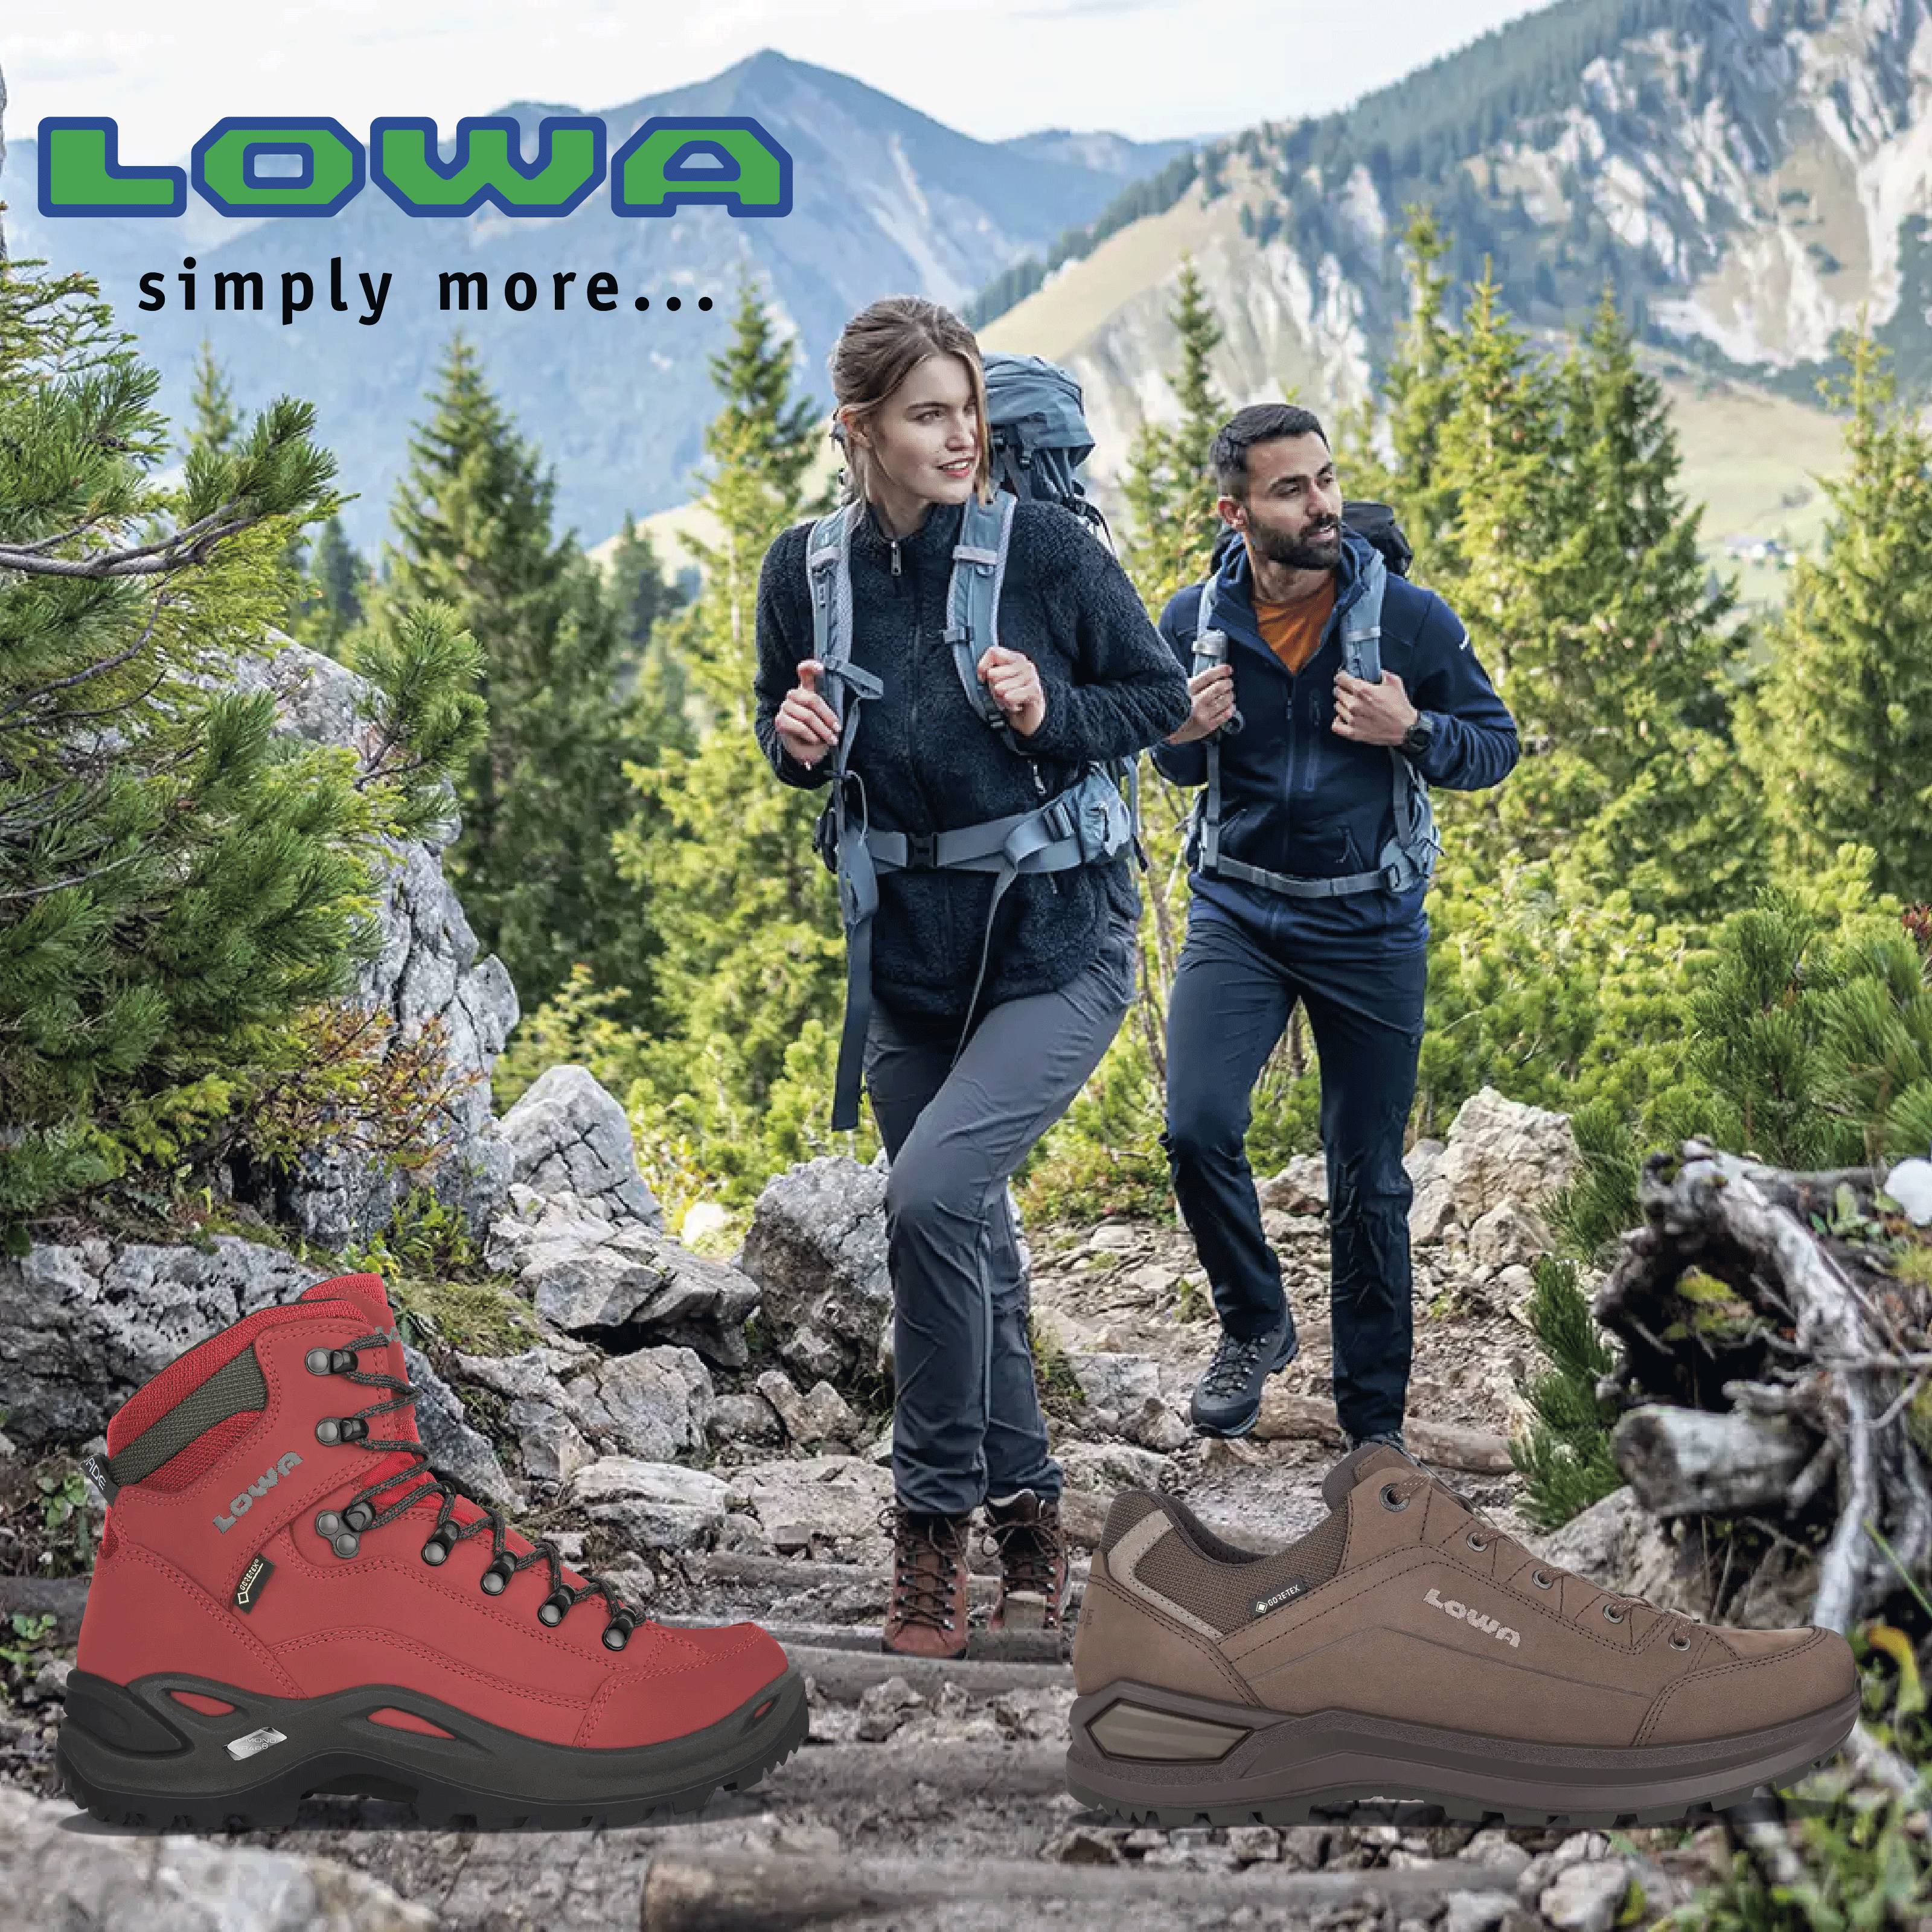 LOWA is a company with a long tradition that has been based from the beginning in the Bavarian town of Jetzendorf. Over a period of nearly 100 years, the small shoe­making shop has become a global outdoor company that sells boots and shoes